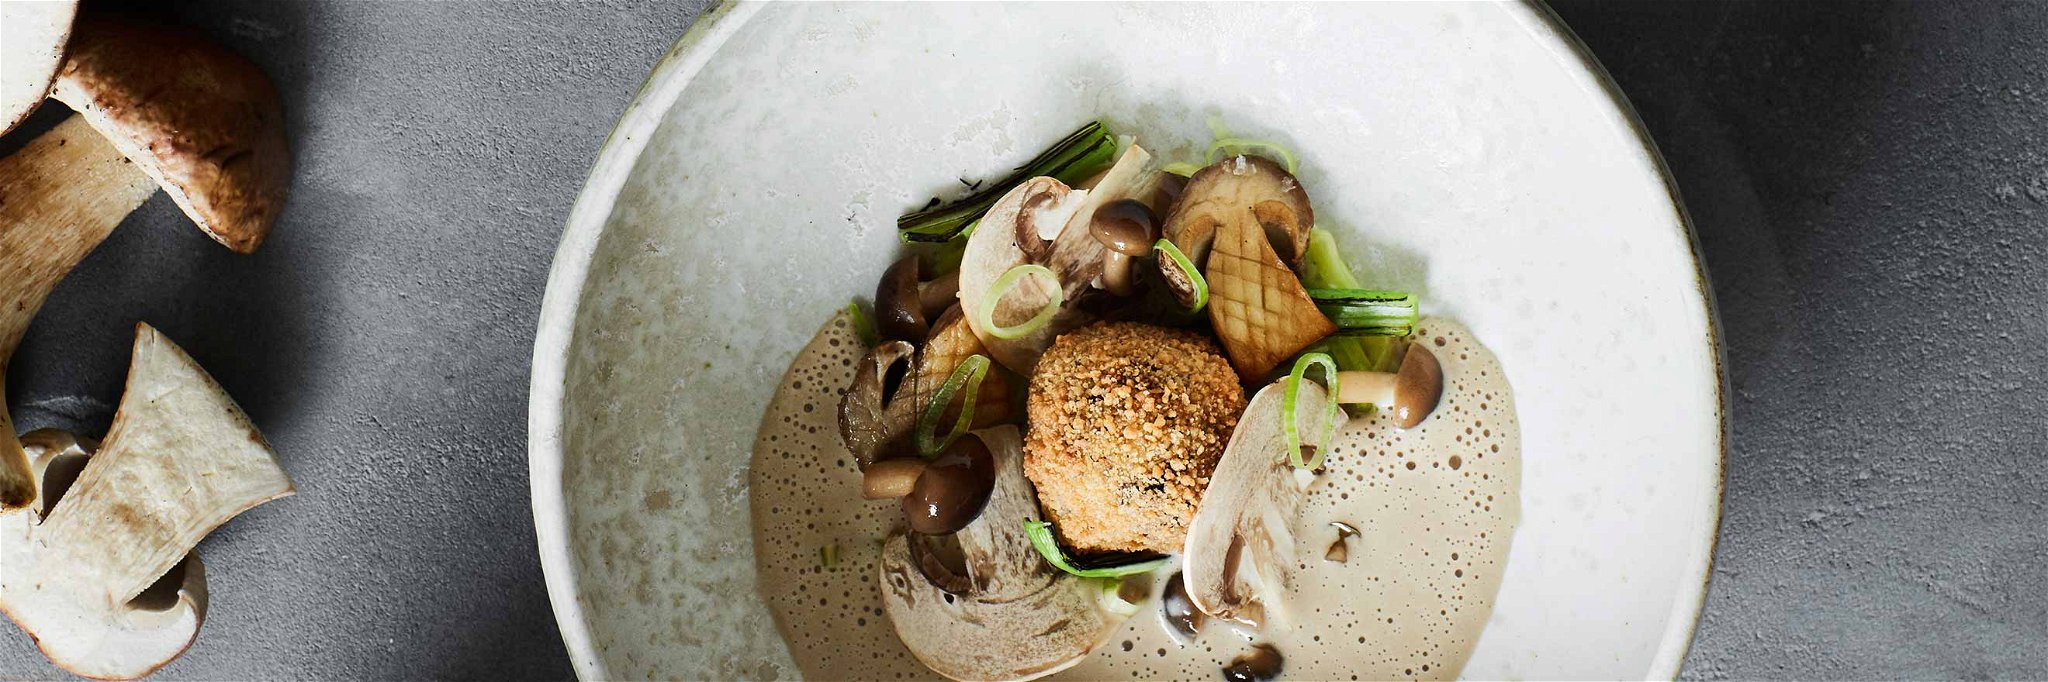 Porcini Soup with Mushrooms and Leeks